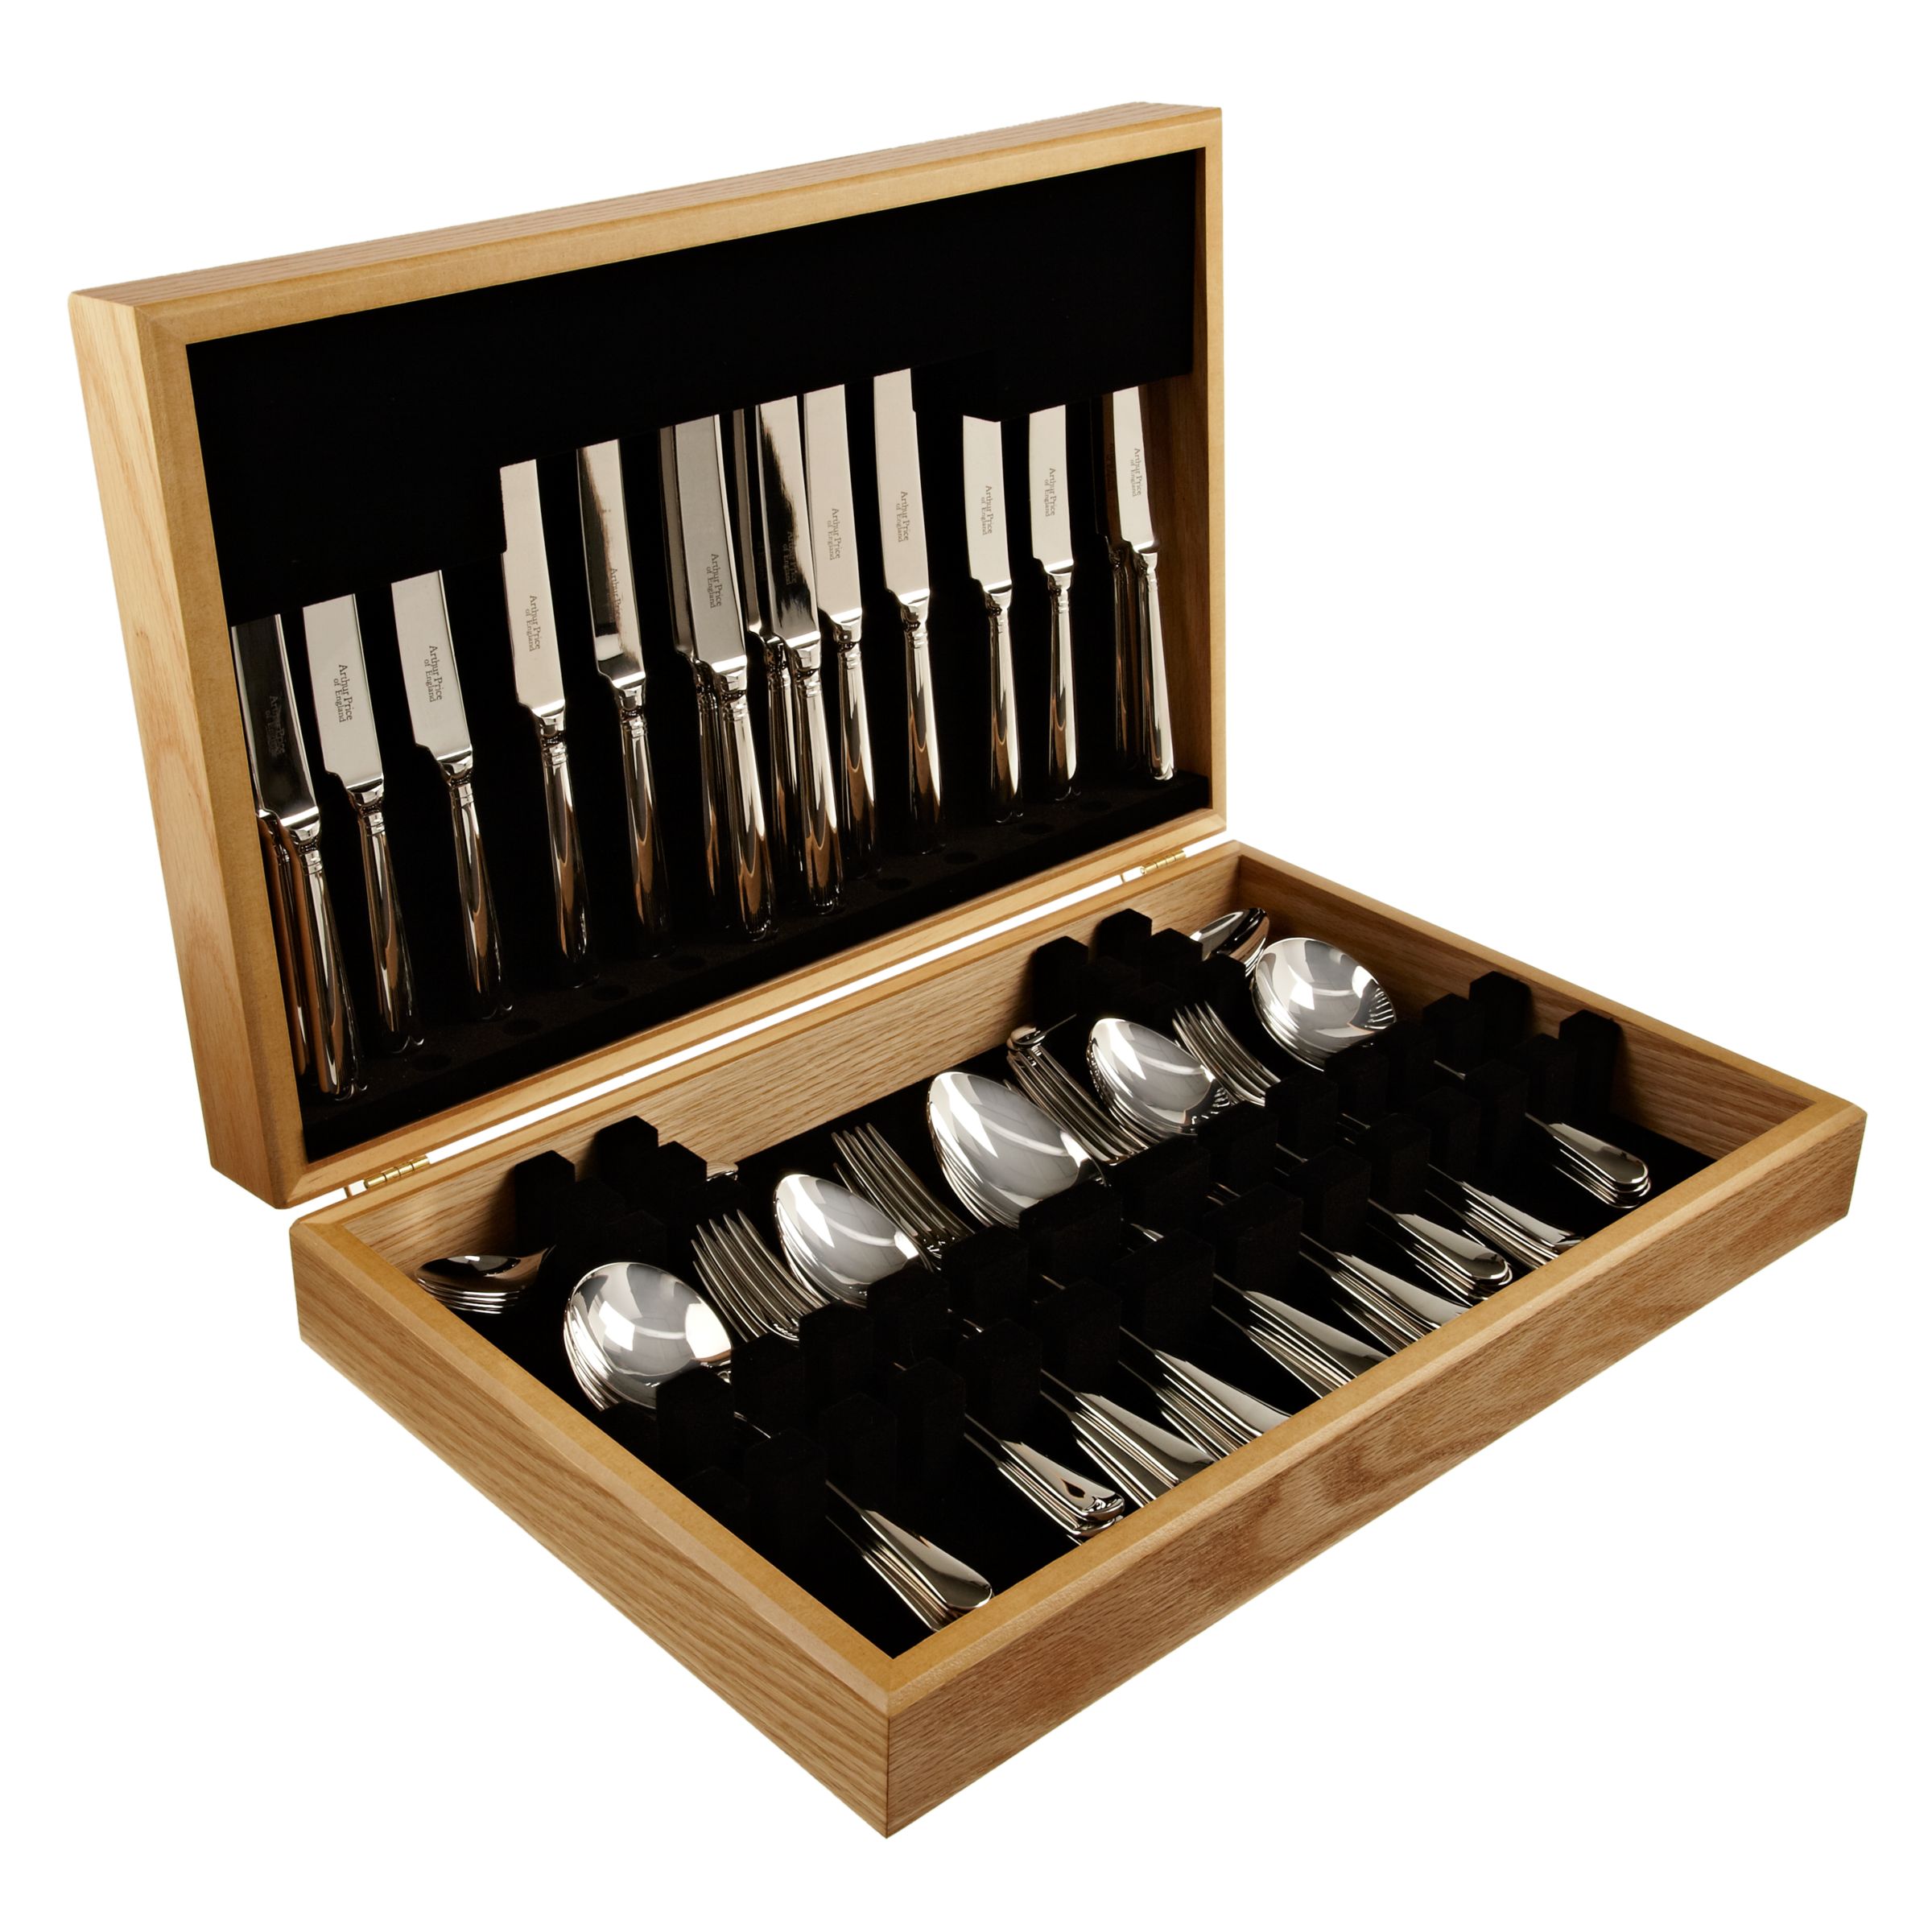 Arthur Price Old English Cutlery Canteen, Stainless Steel, 60-Piece at John Lewis